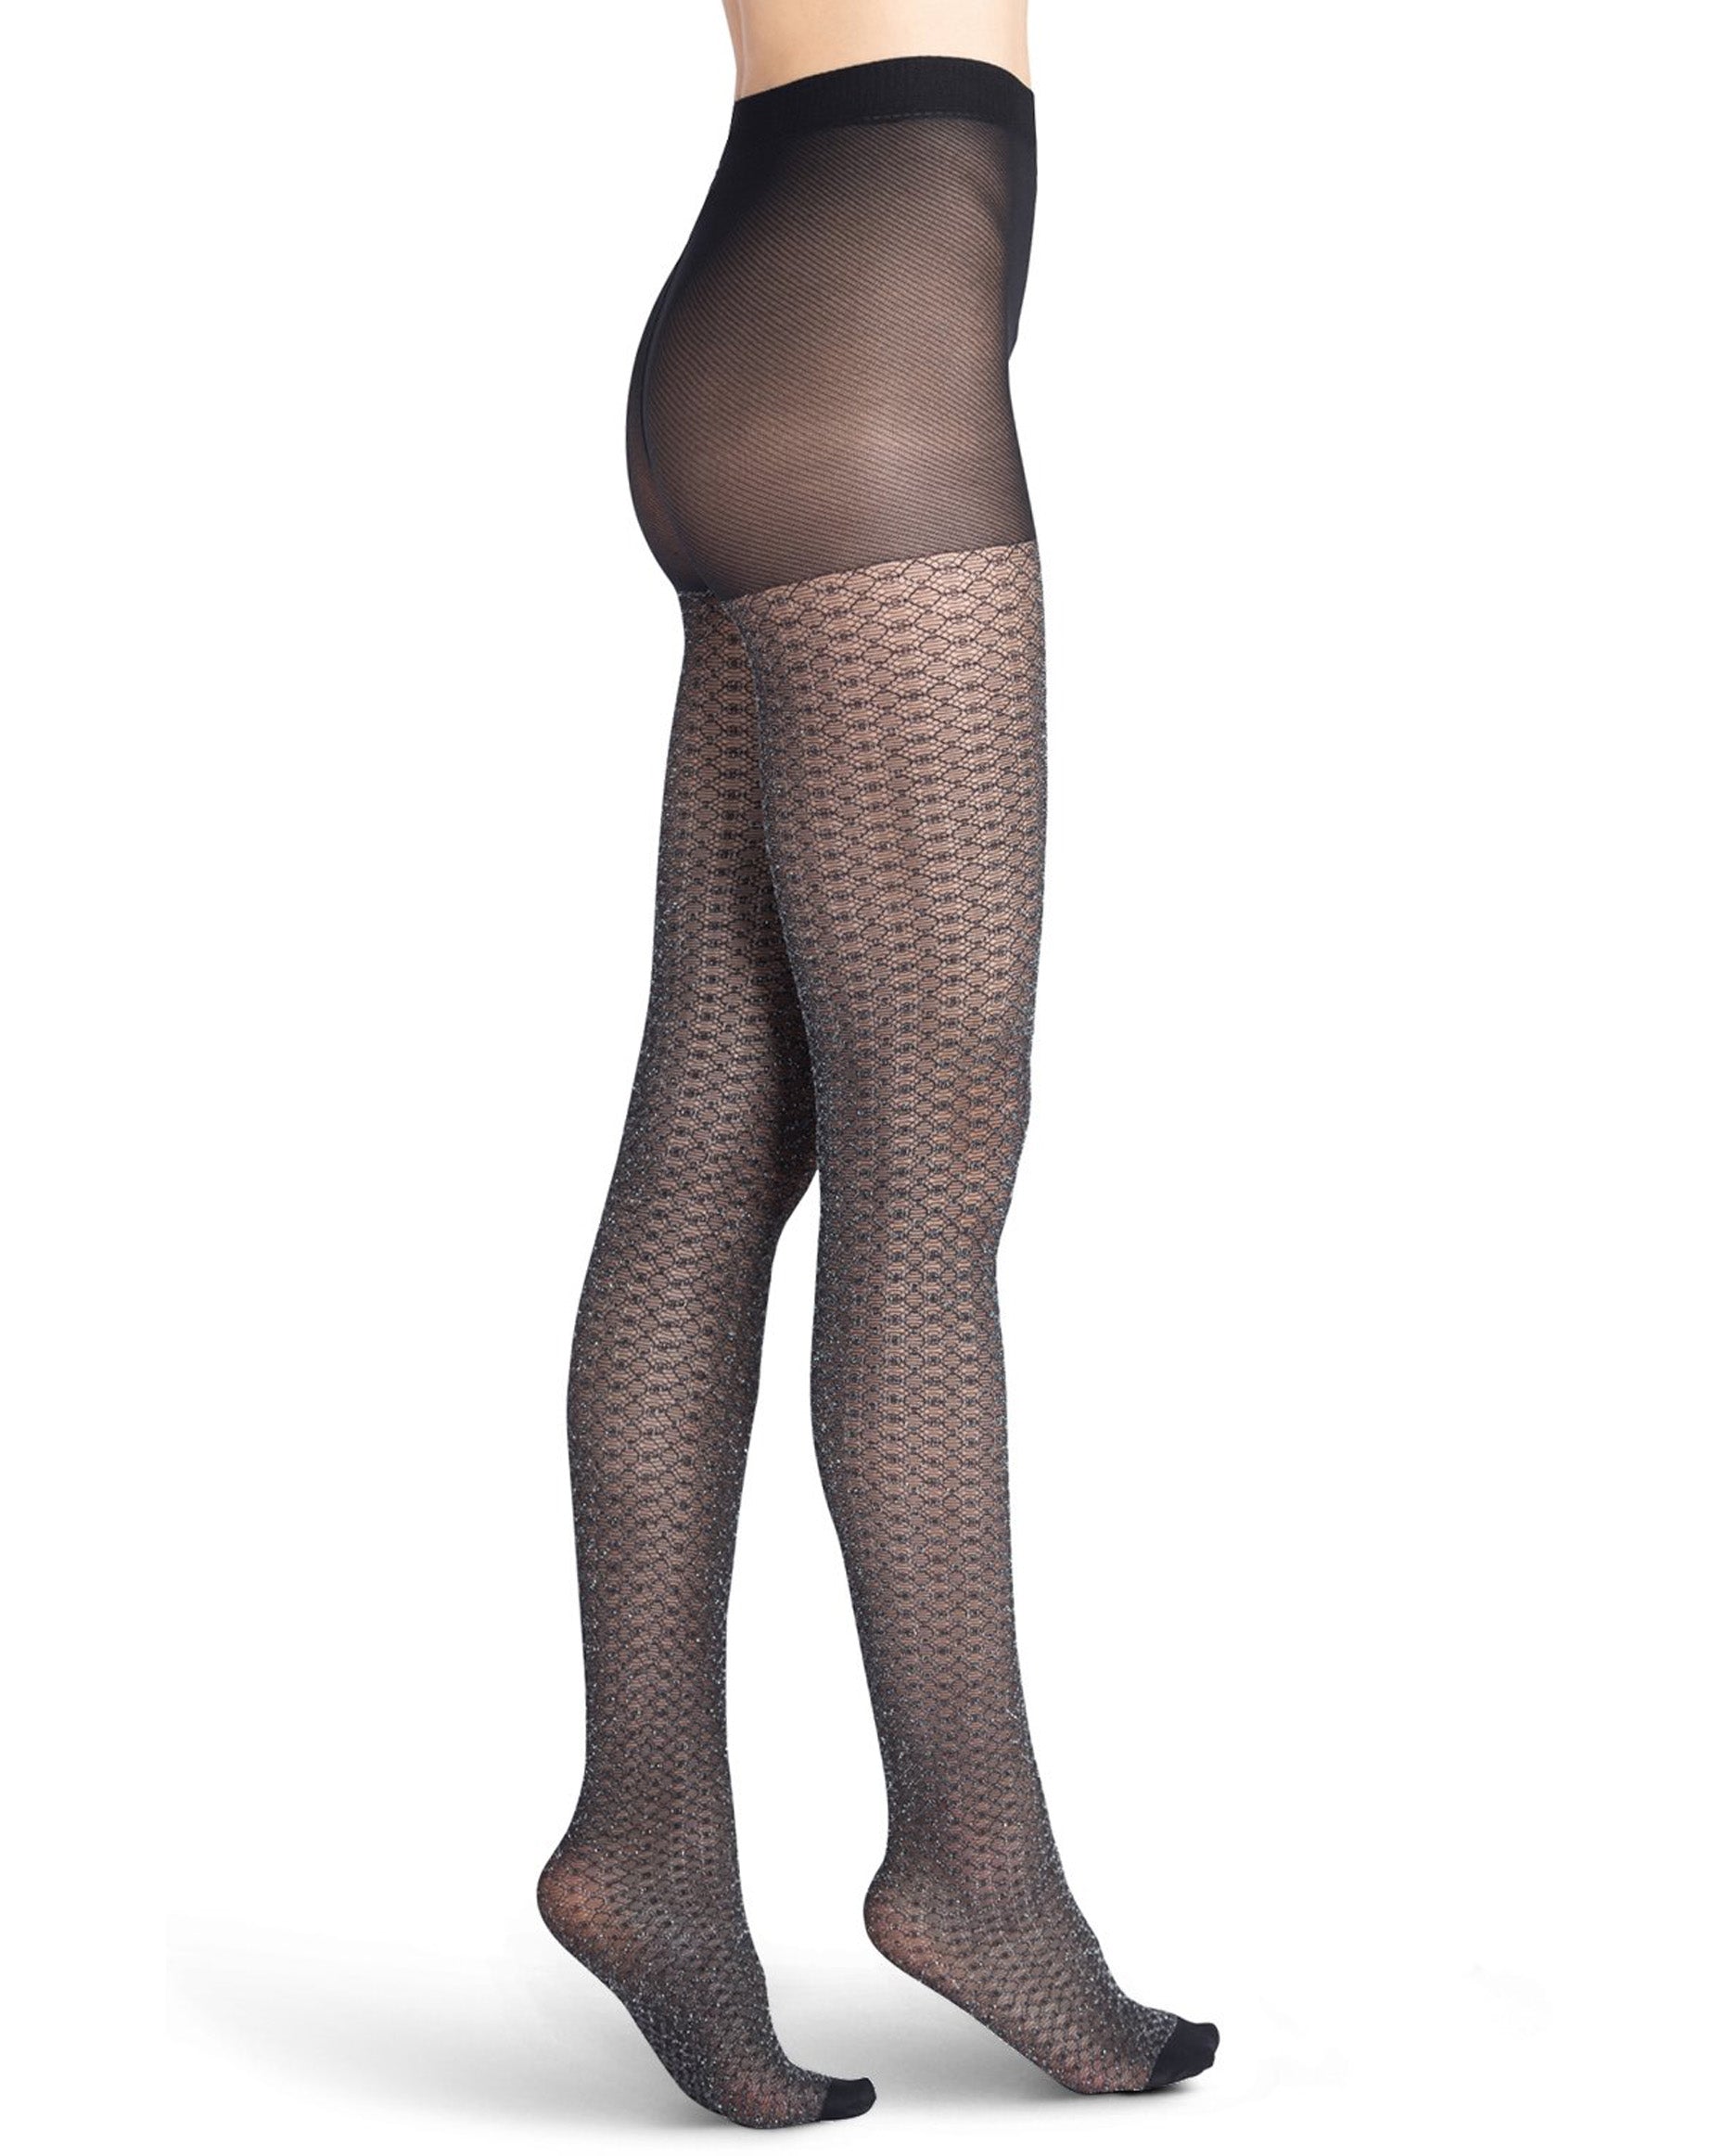 Emilio Cavallini Metallized Beehive Tights - Sheer black micro mesh tights with a circular lace style pattern with sparkly silver lamé, boxer brief, flat seams, gusset and reinforced toe. 